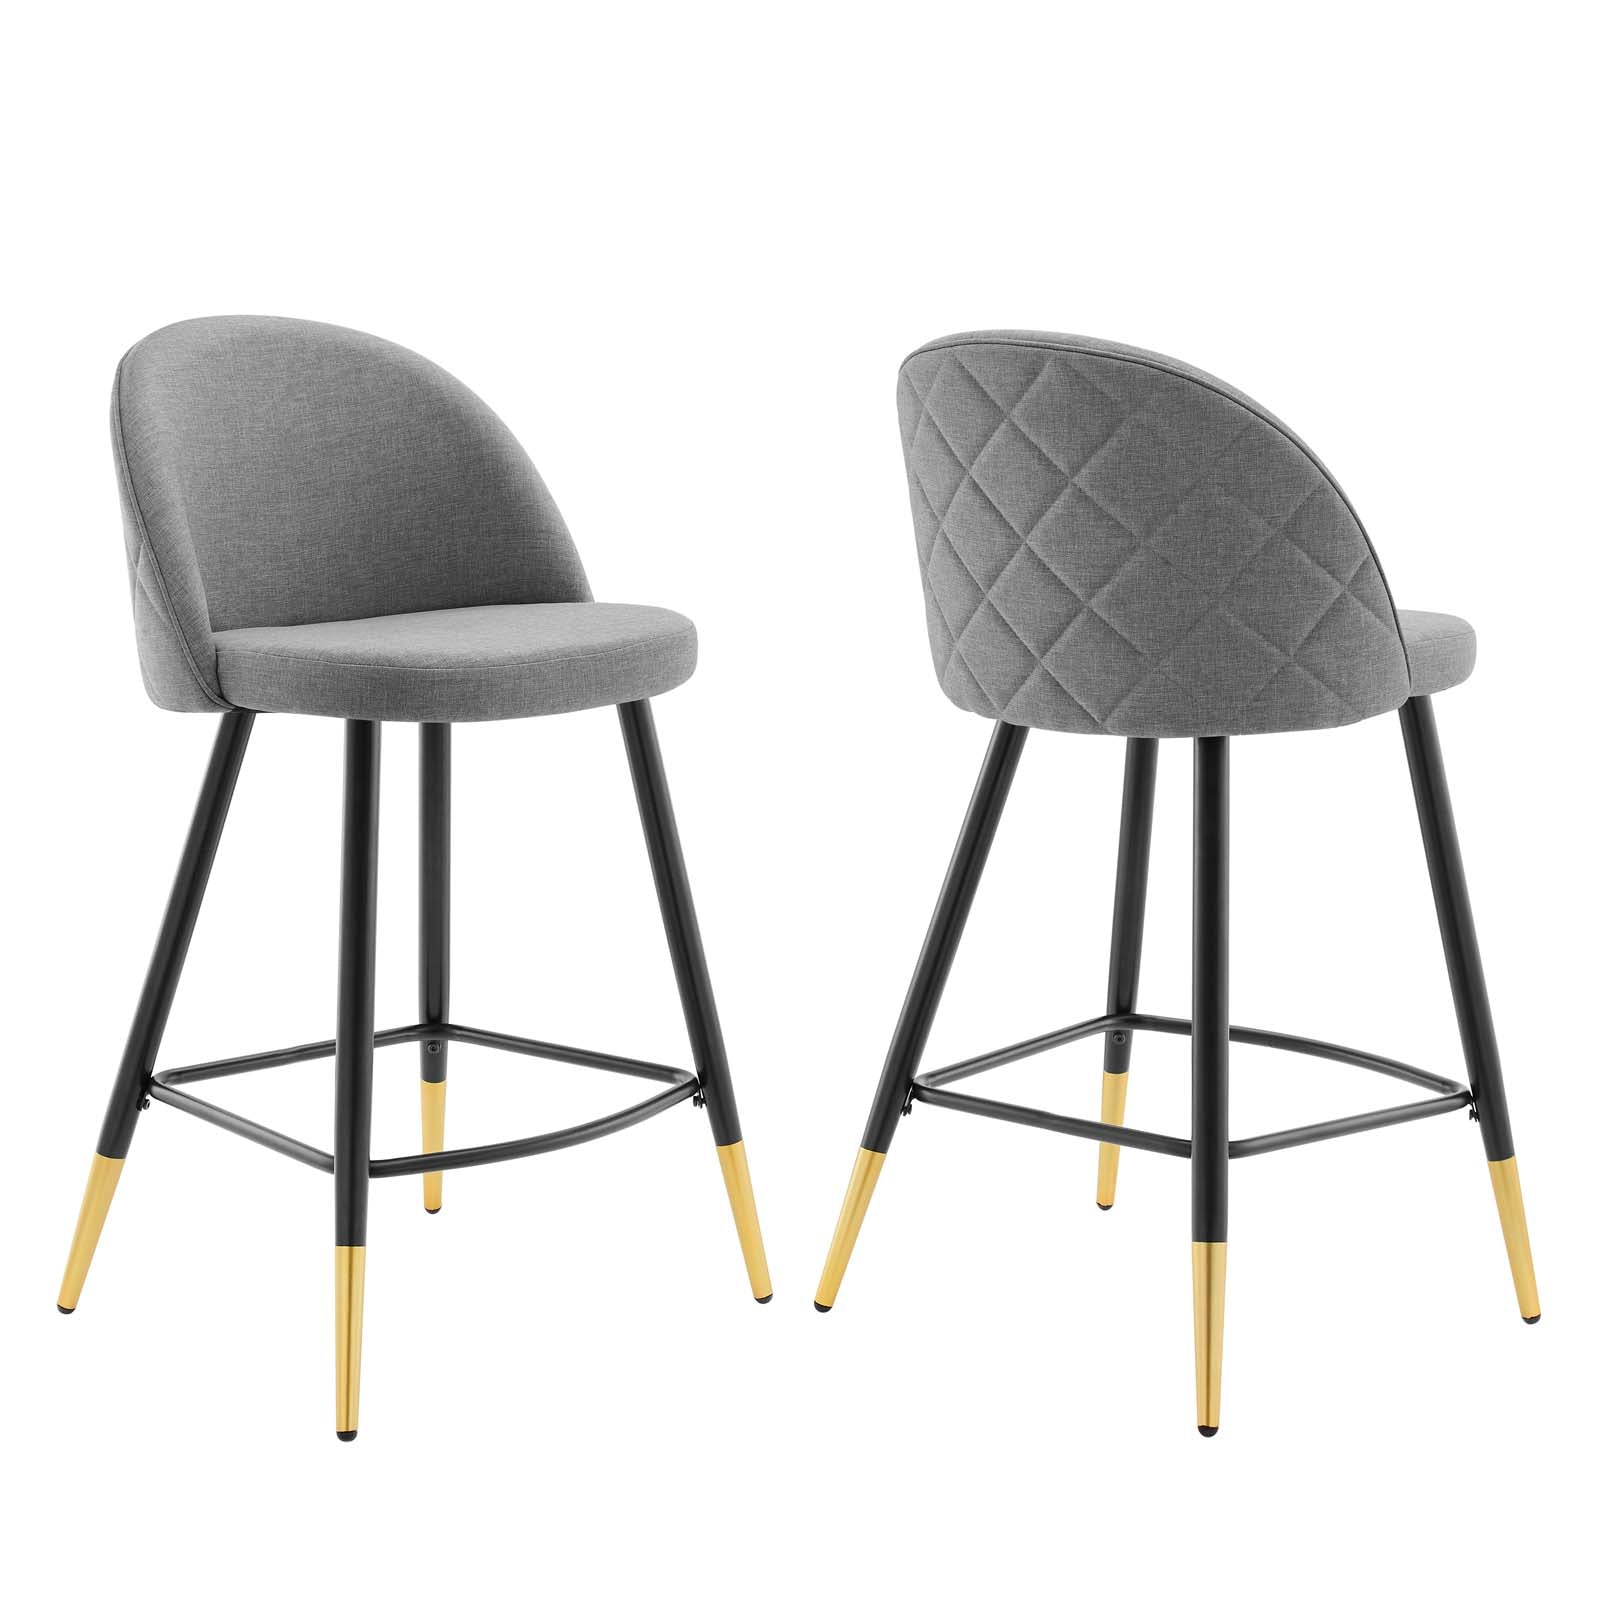 Modway Barstools - Cordial Fabric Counter Stools - ( Set of 2 ) Light Gray